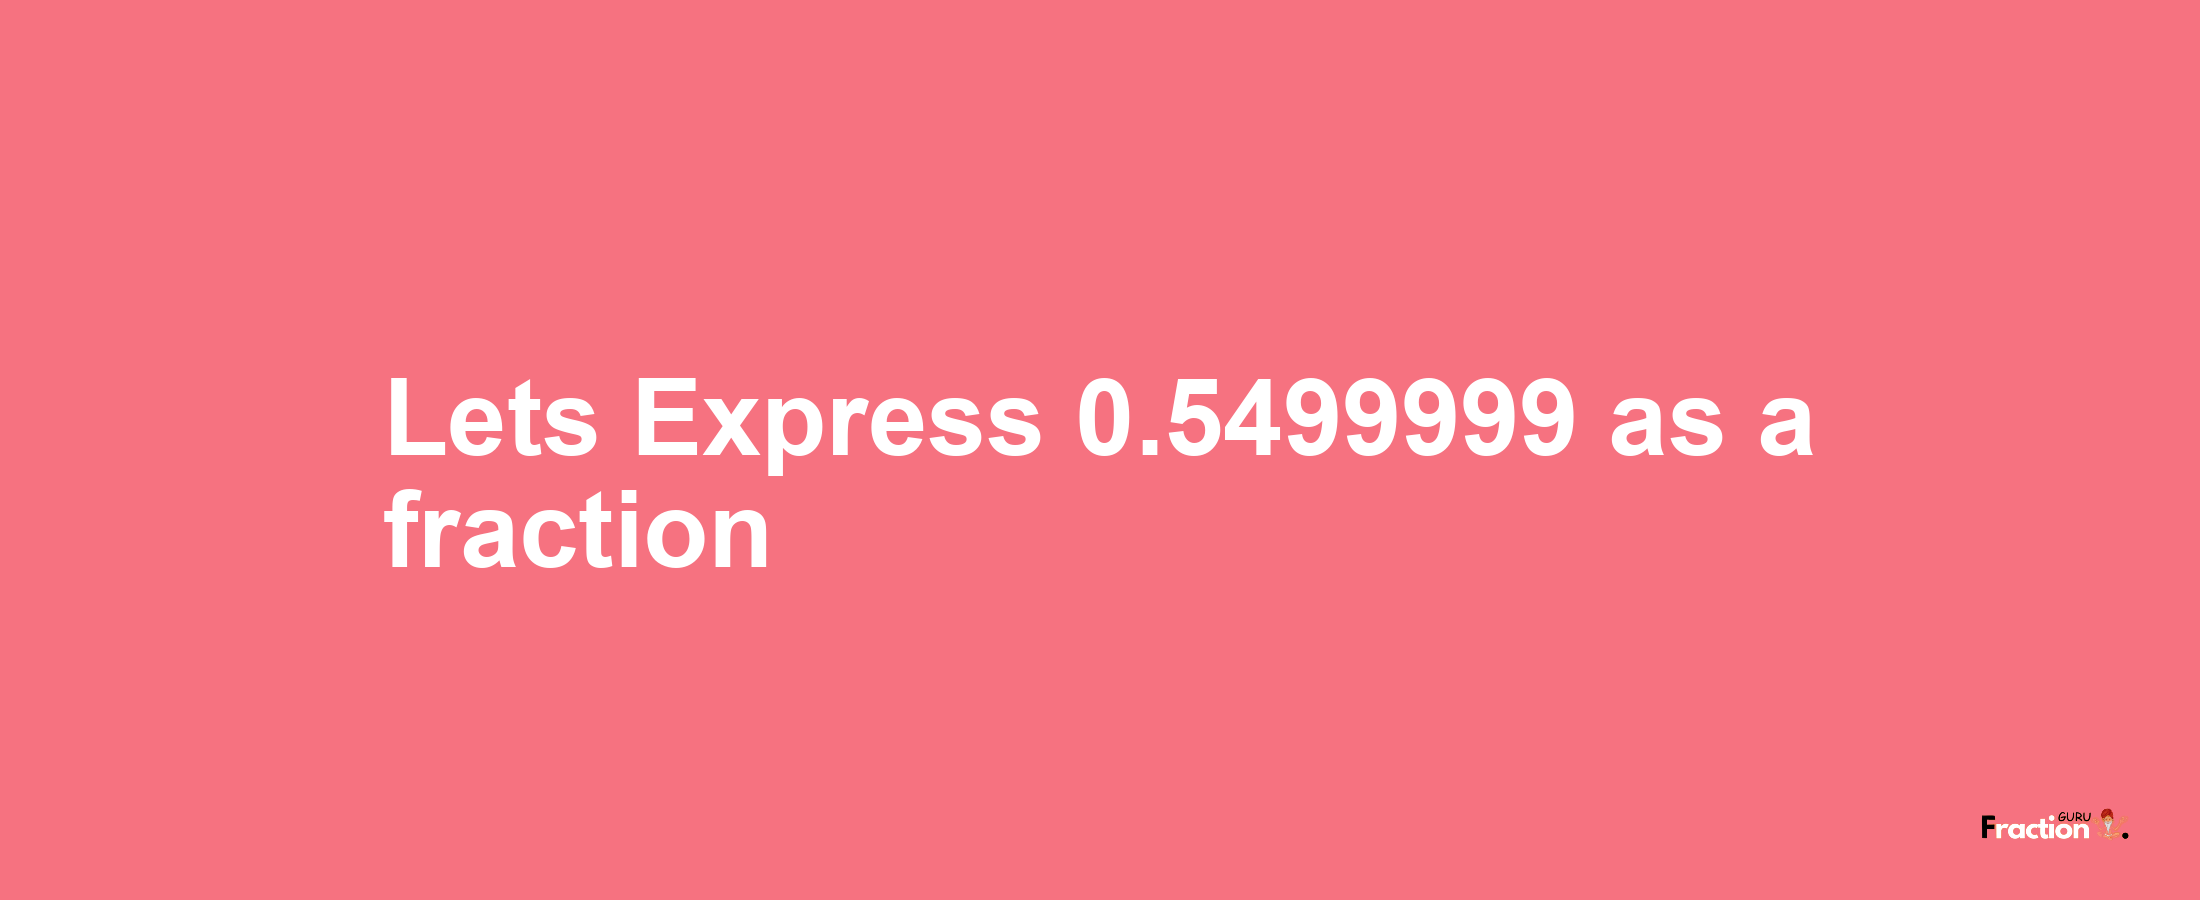 Lets Express 0.5499999 as afraction